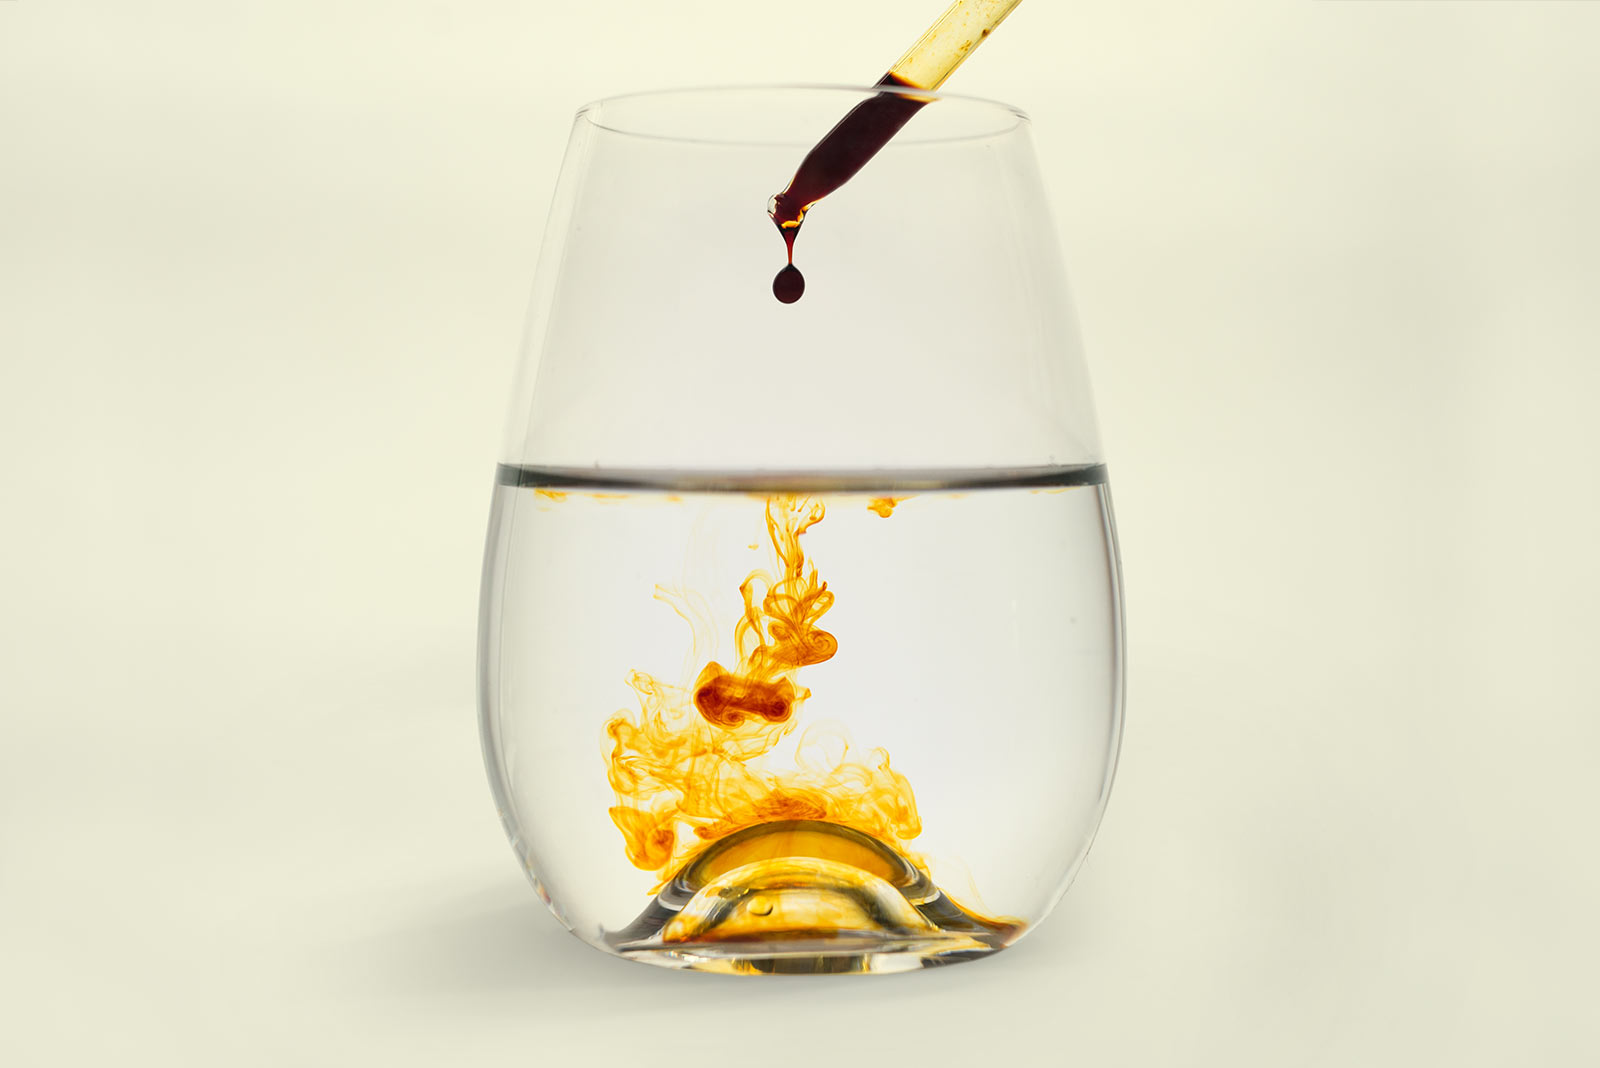 Iodine solution being dropped into a wine glass of water